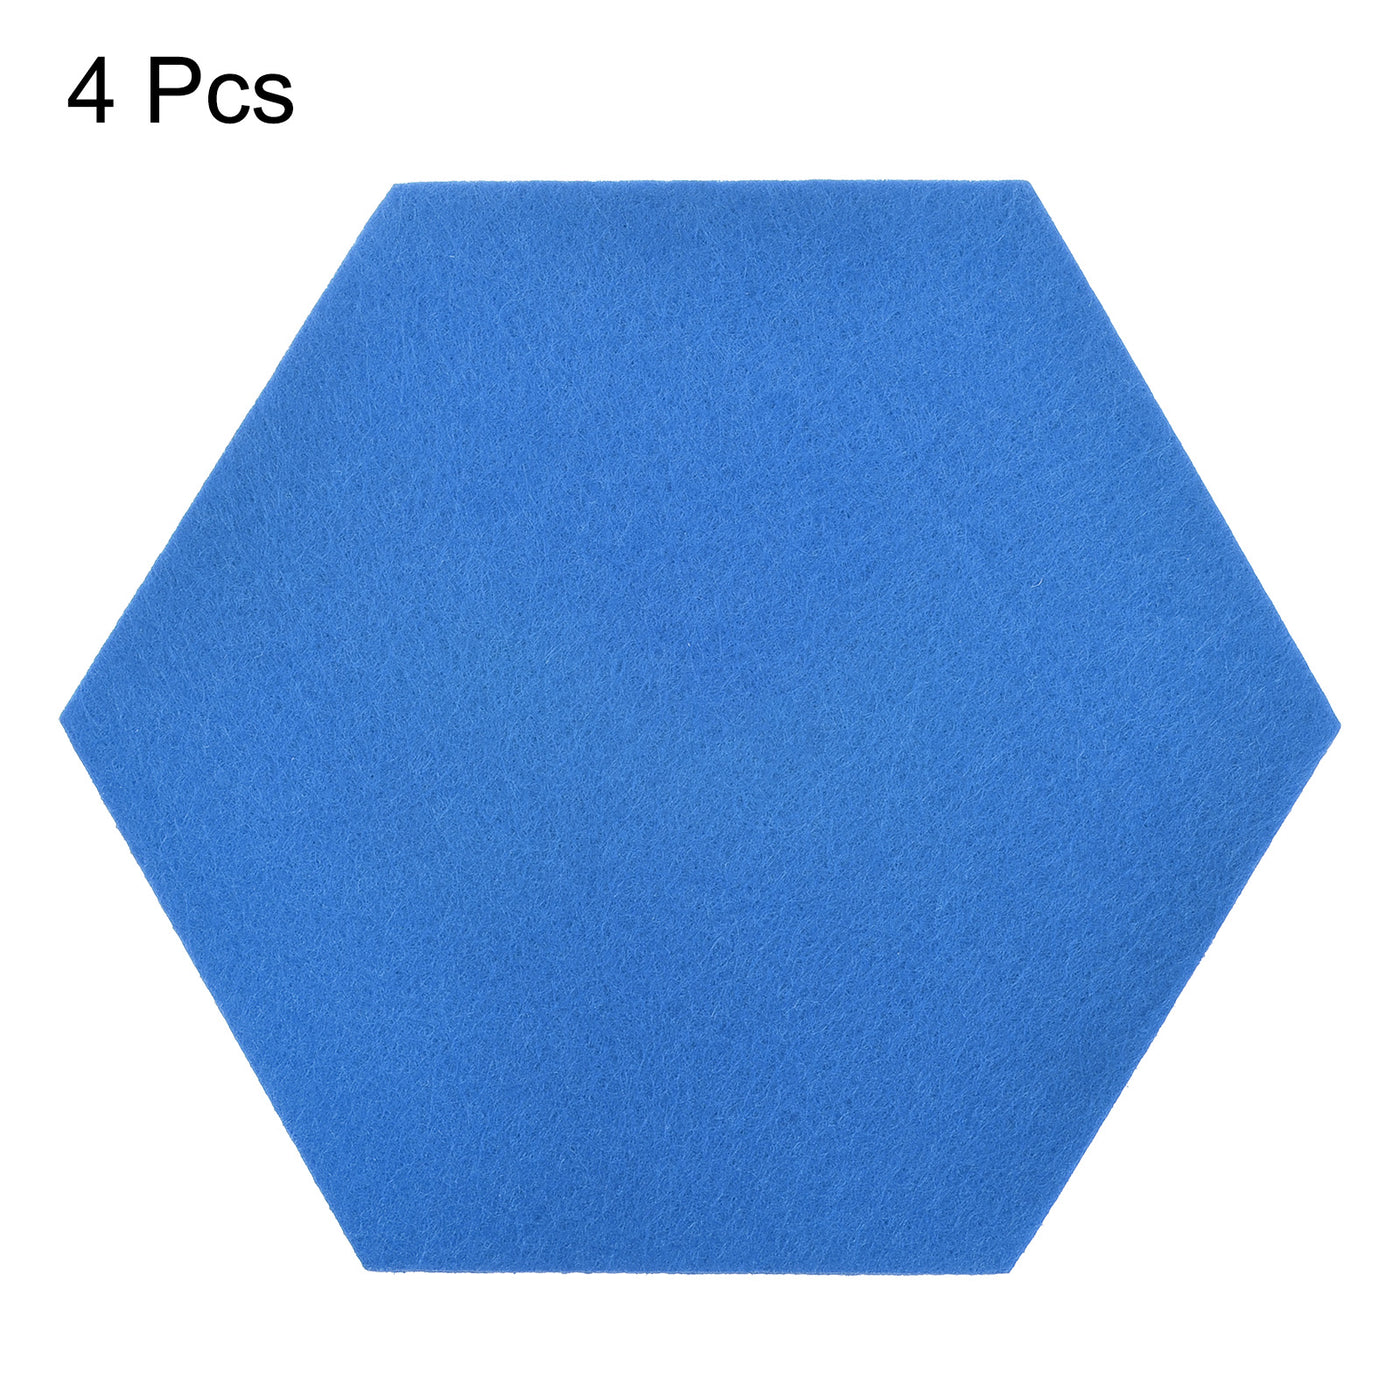 uxcell Uxcell Felt Coasters 4pcs Absorbent Pad Coaster for Drink Cup Pot Bowl Vase Sky Blue